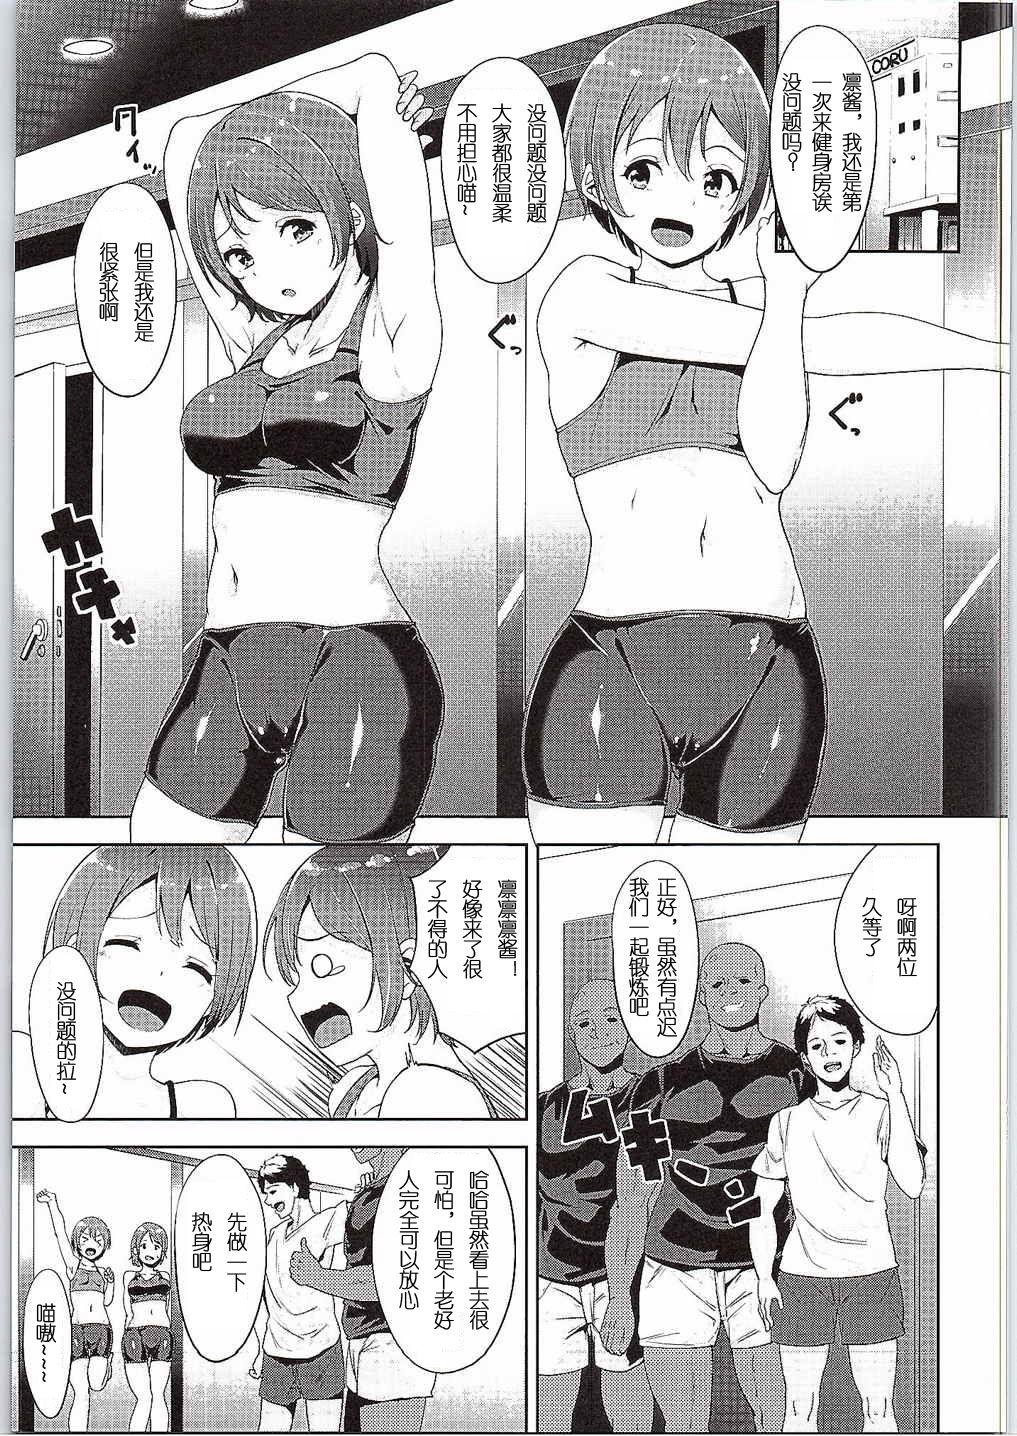 Friends LOVE FITTING ROOM - Love live Toy - Page 4